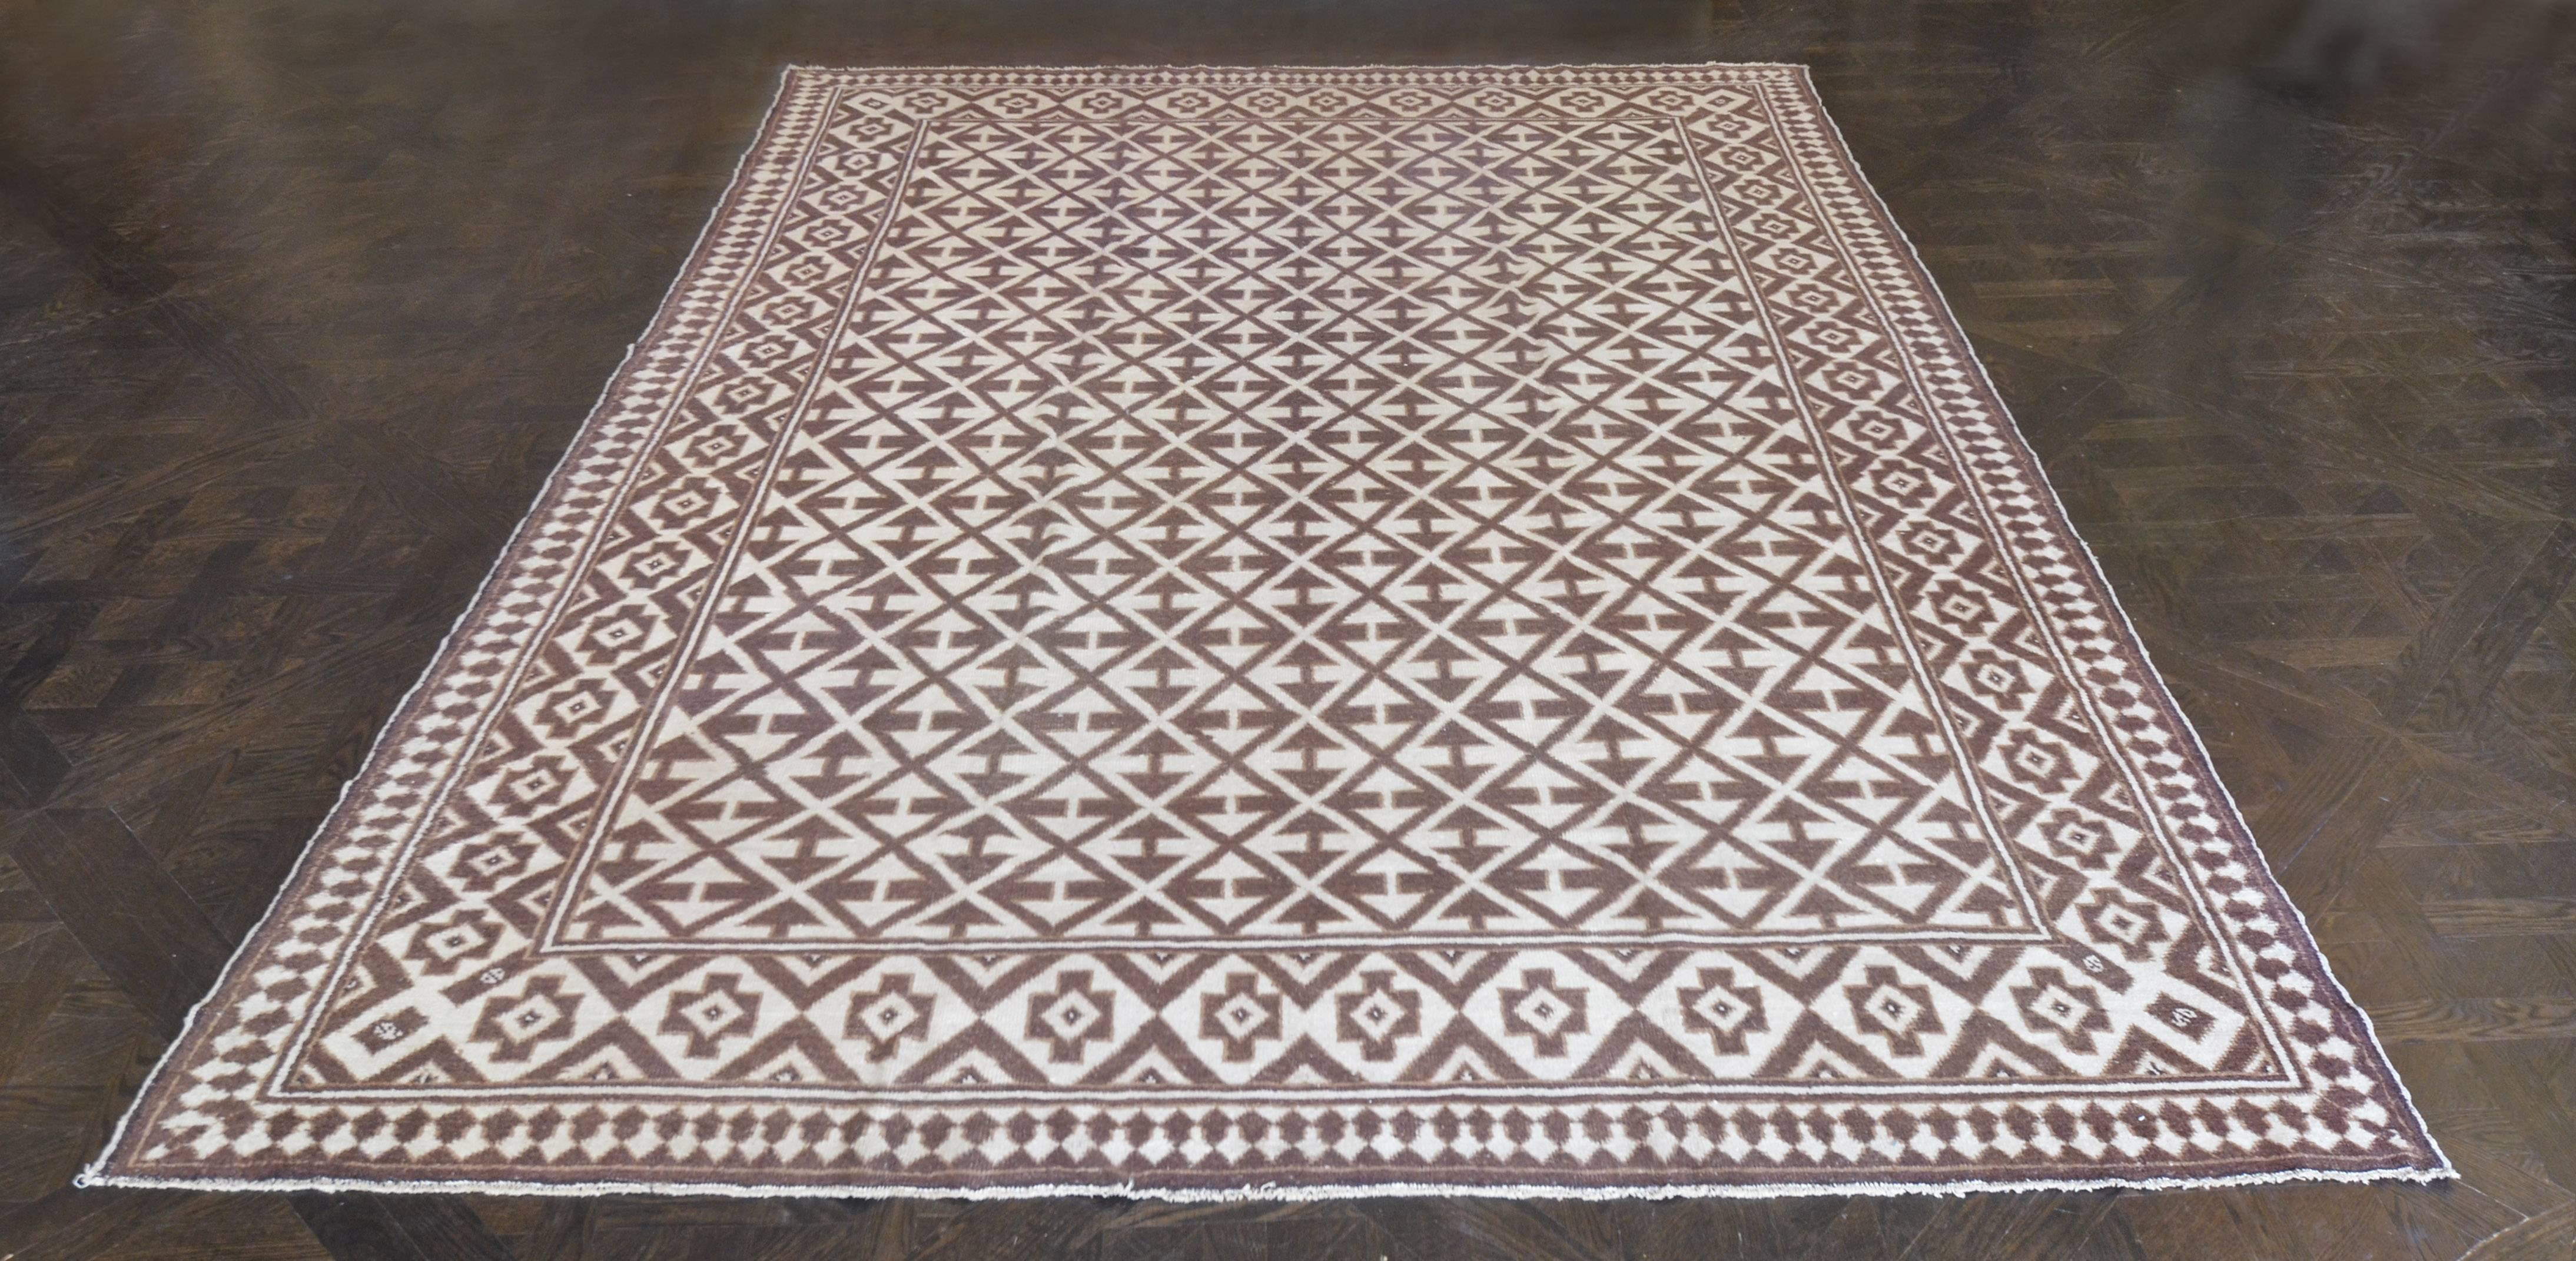 This traditional handwoven Moroccan rug has a chocolate field with diagonal lozenge lattice of reciprocal arrow motif, in an intricate steel and brown two-tone geometric border, outer reciprocal skittle-pattern stripe. 100% Wool.